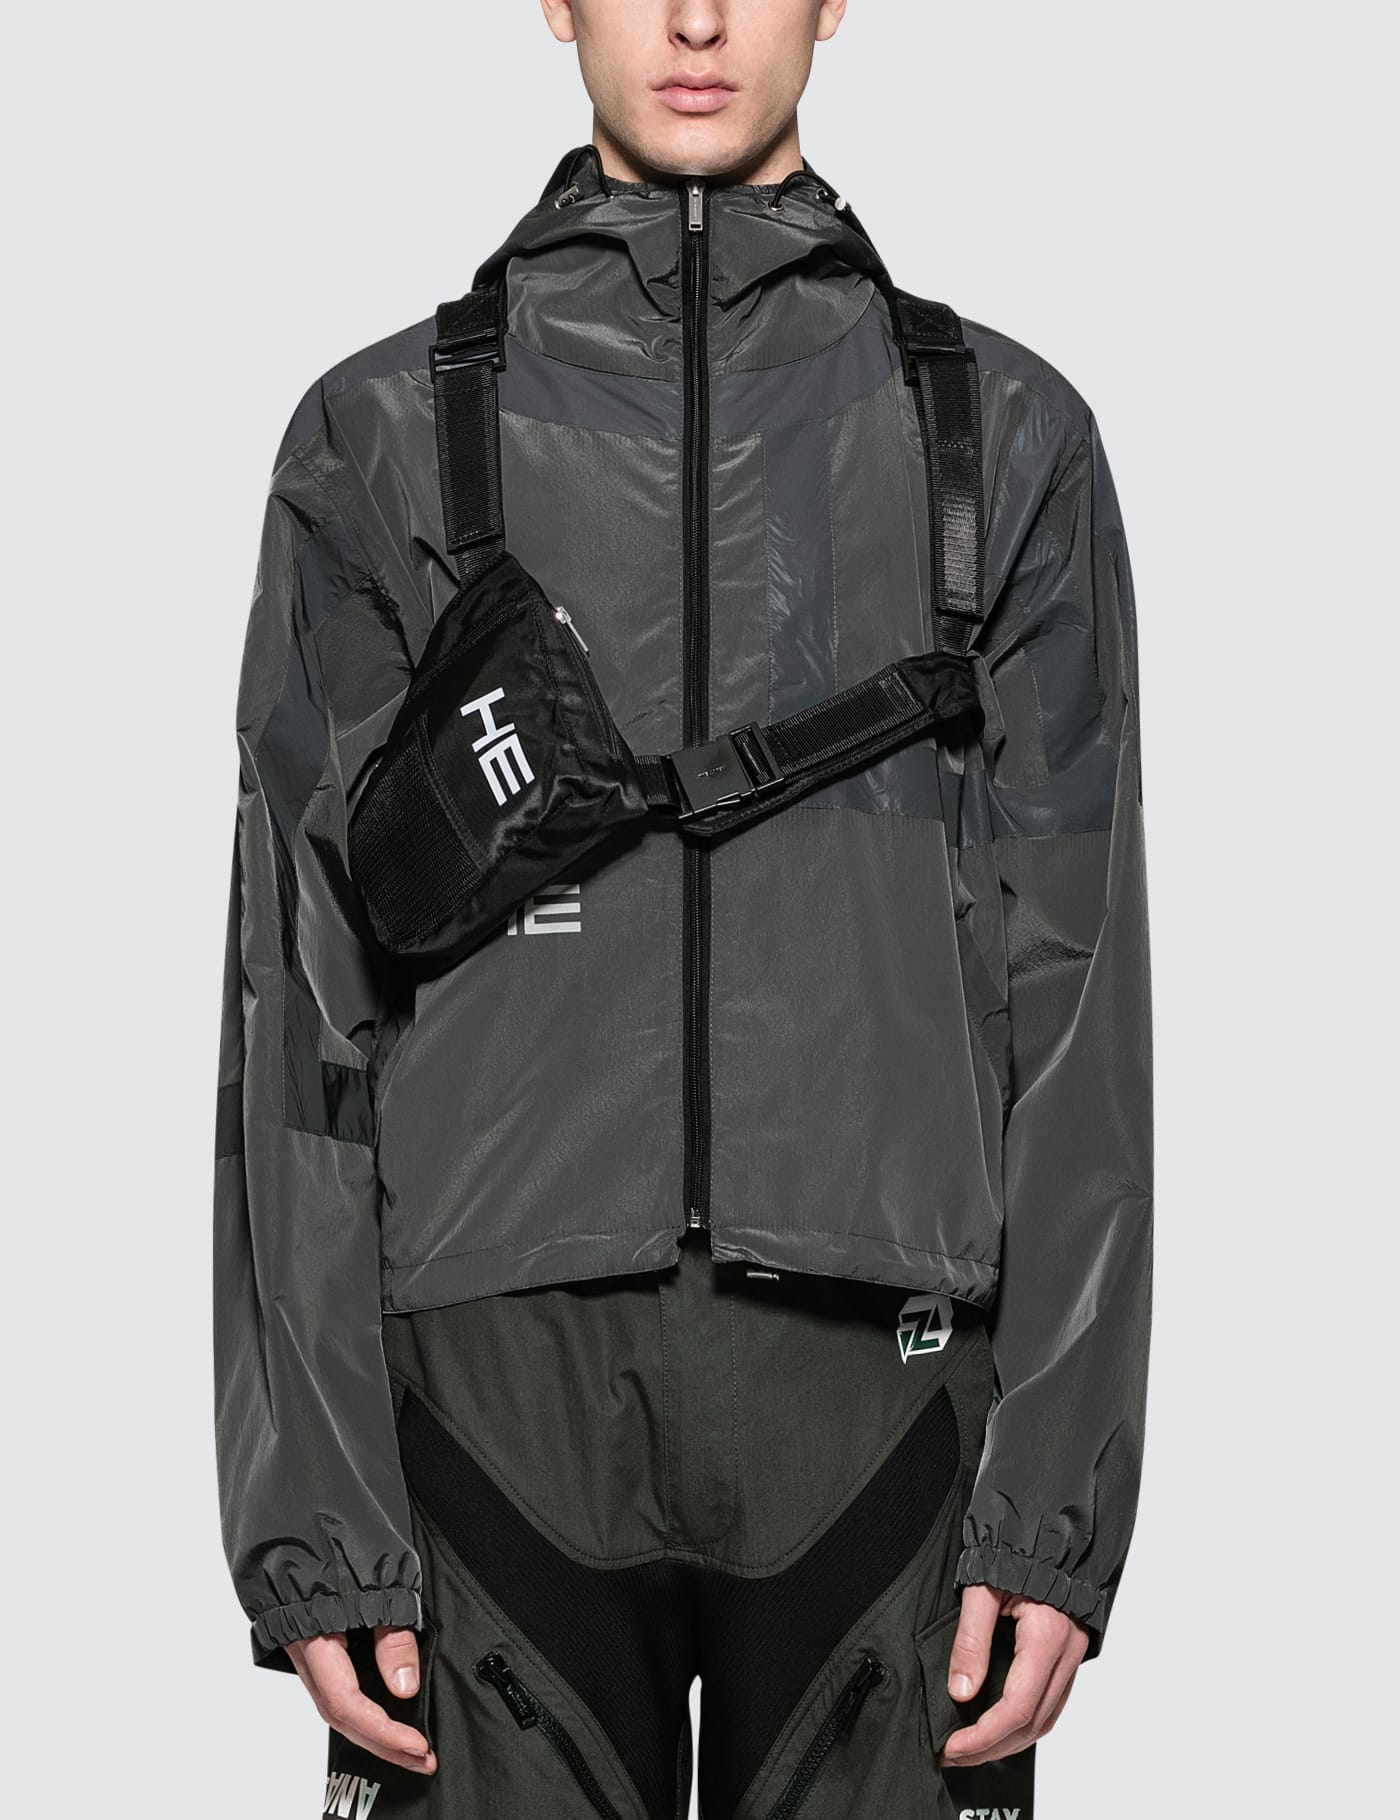 Heliot Emil - Technical Fabric Jacket with Chest Bag | HBX